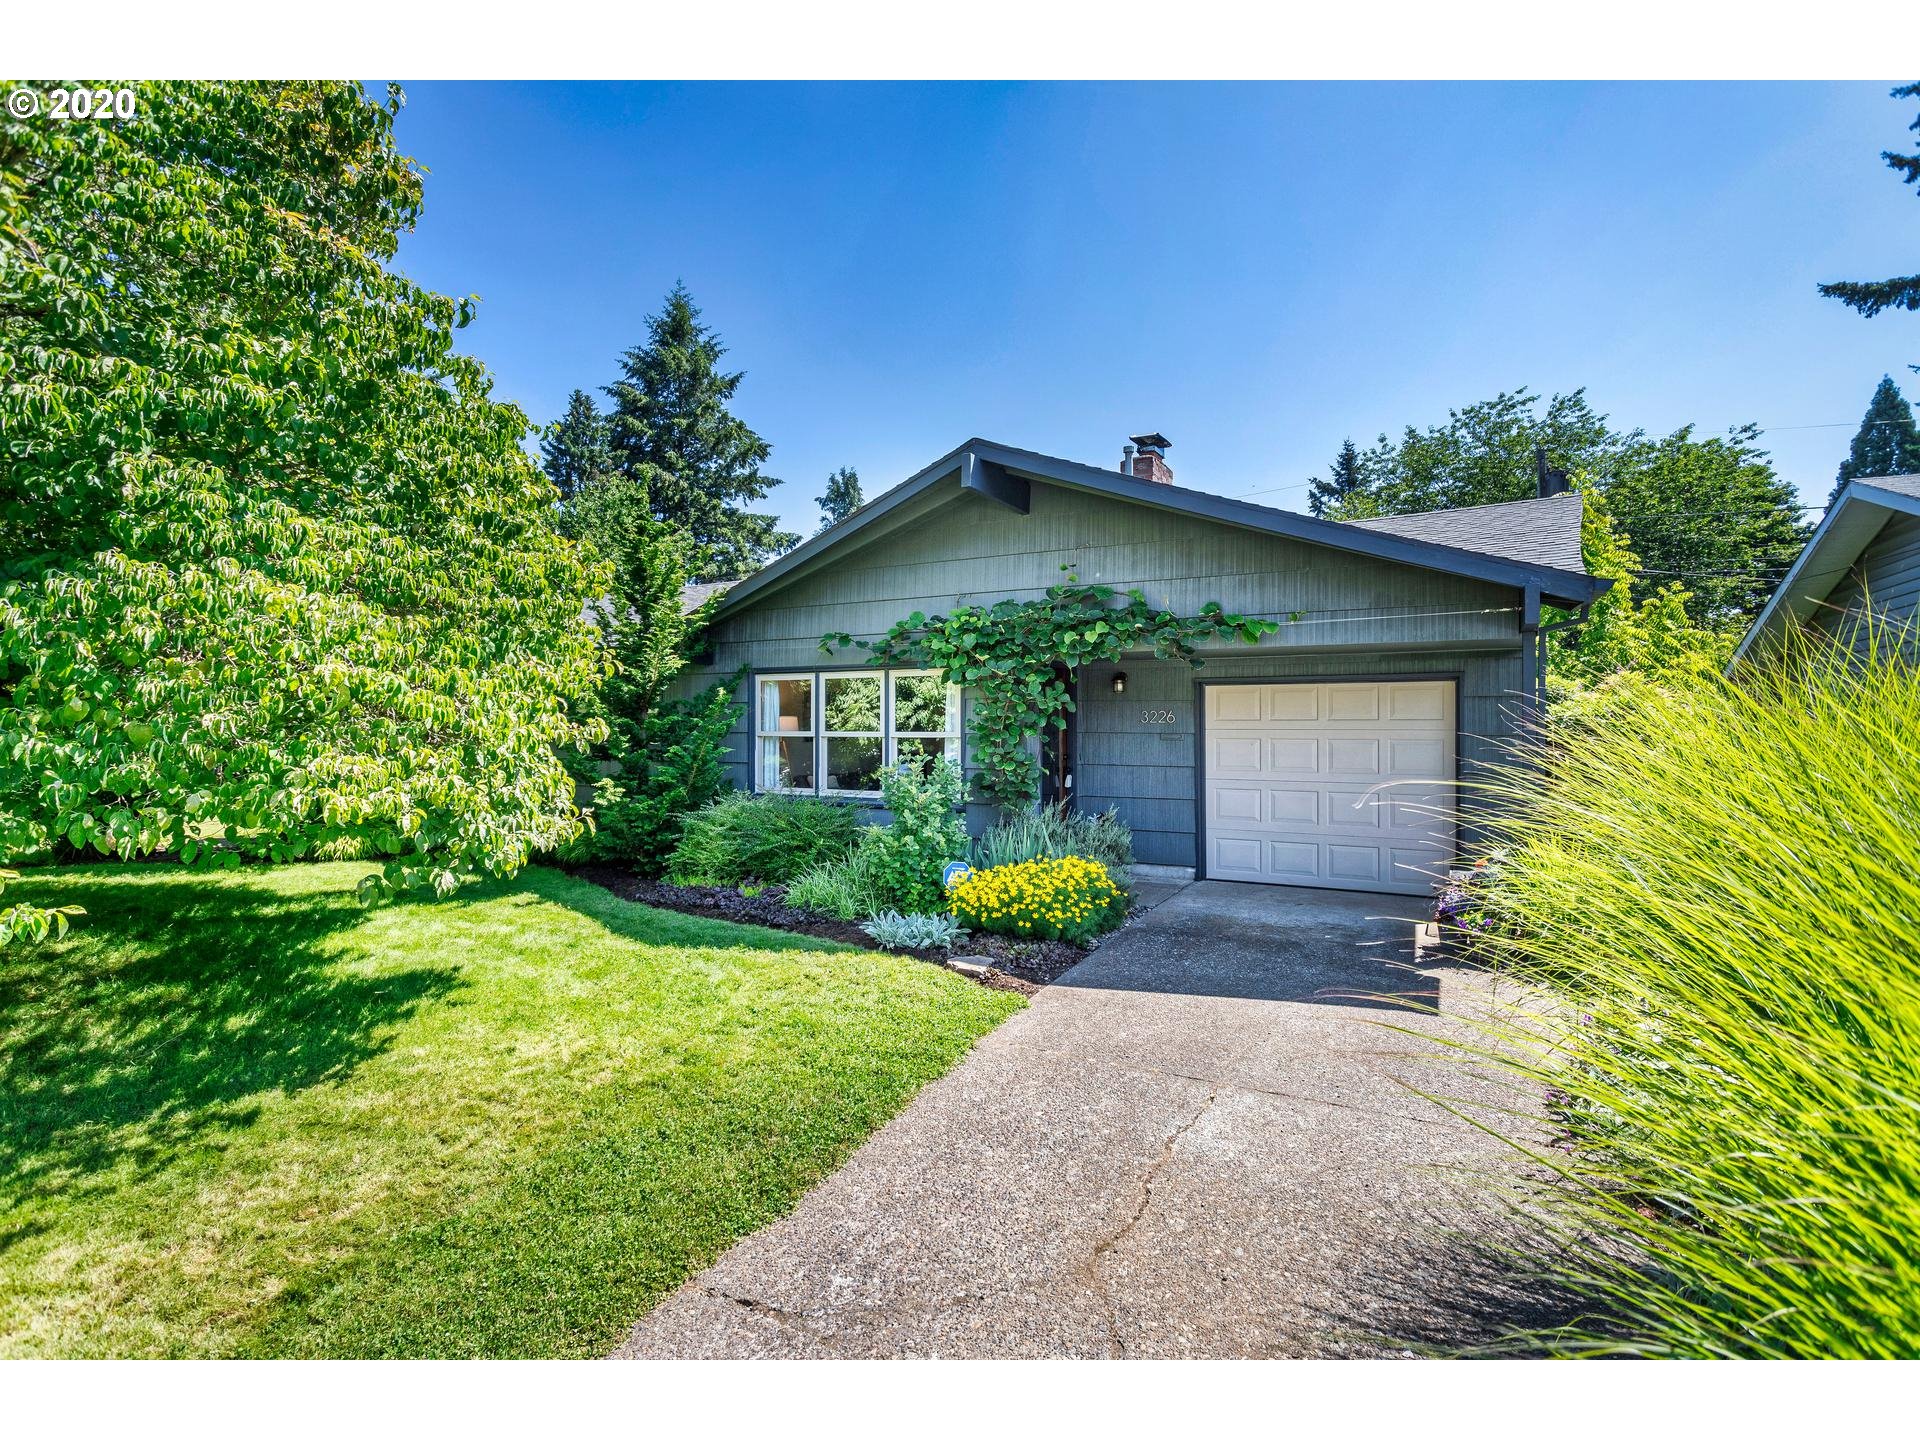 3226 SE 165TH AVE (1 of 27)